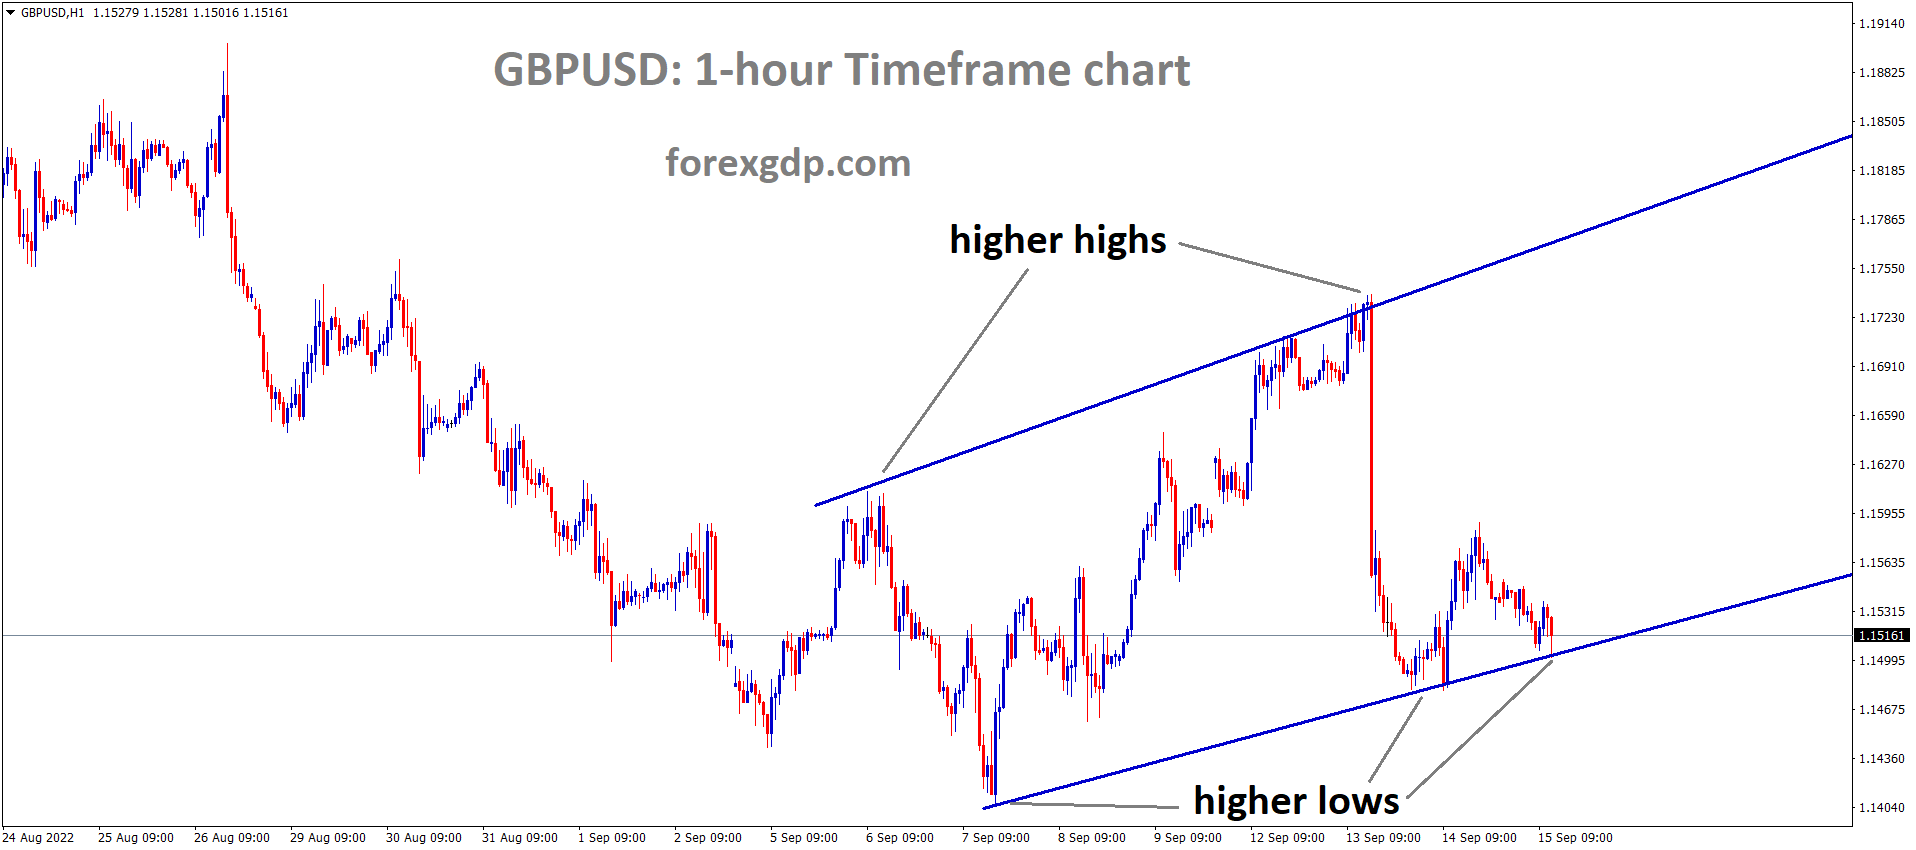 GBPUSD is moving in an Ascending channel and the market has reached the higher low area of the channel